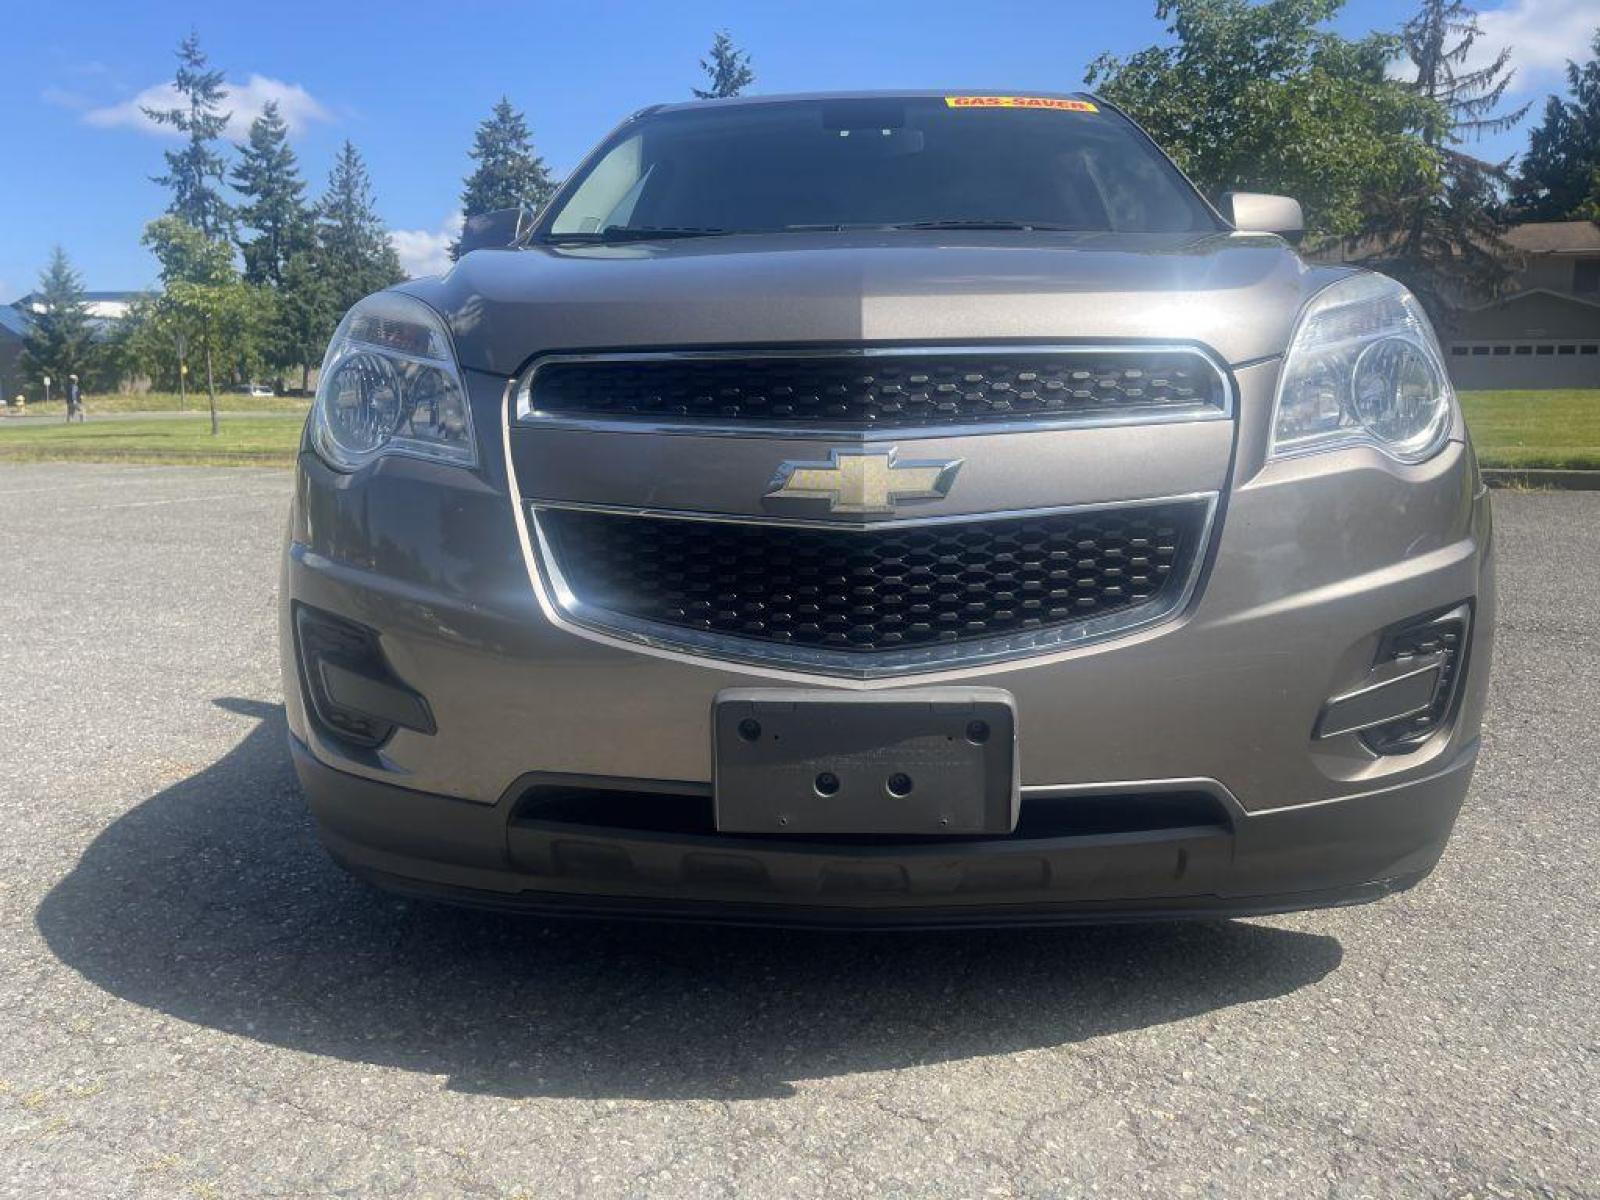 2012 GOLD /BLACK CHEVROLET EQUINOX LT SPORT FLEX FUEL (2GNFLEEK2C6) with an 2.4L engine, Automatic transmission, located at 1505 S 356th St., Federal Way, WA, 98003, 47.282051, -122.314781 - JUST REDUCED TO $8,000!!! AWD will handle wonderful in the rain and PNW weather conditions during fall and winter! Runs great and new timing belt so no surprise repair bill of $4500! This Equinox is a great compact SUV with engaging handling and enough gusto for daily driving, but very goo - Photo #3